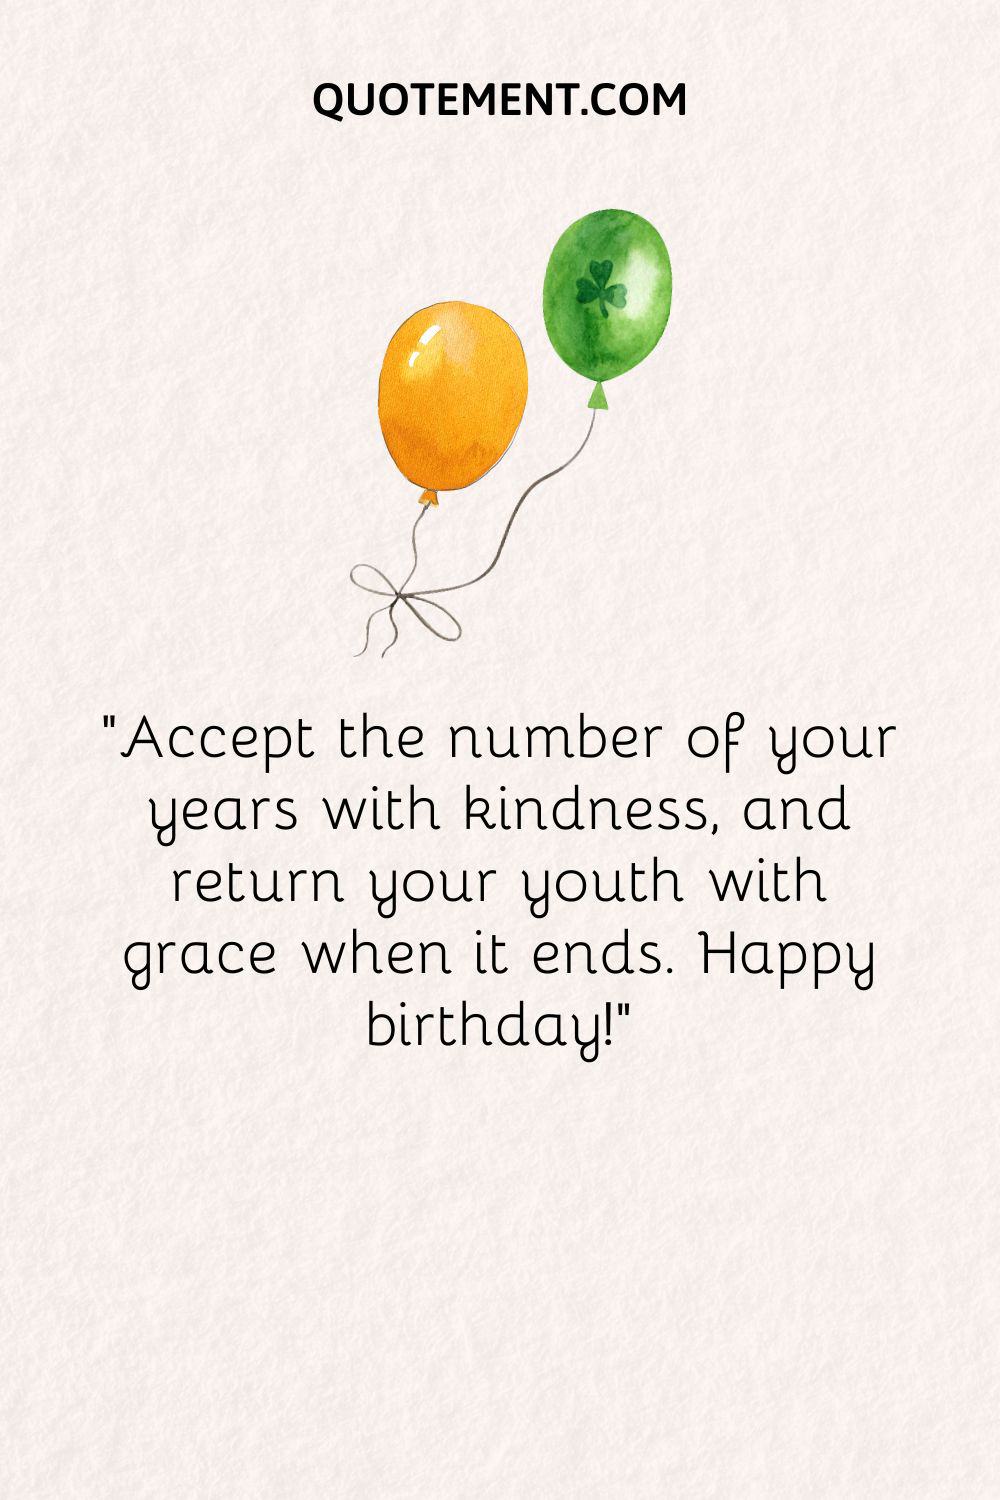 Accept the number of your years with kindness, and return your youth with grace when it ends. Happy birthday